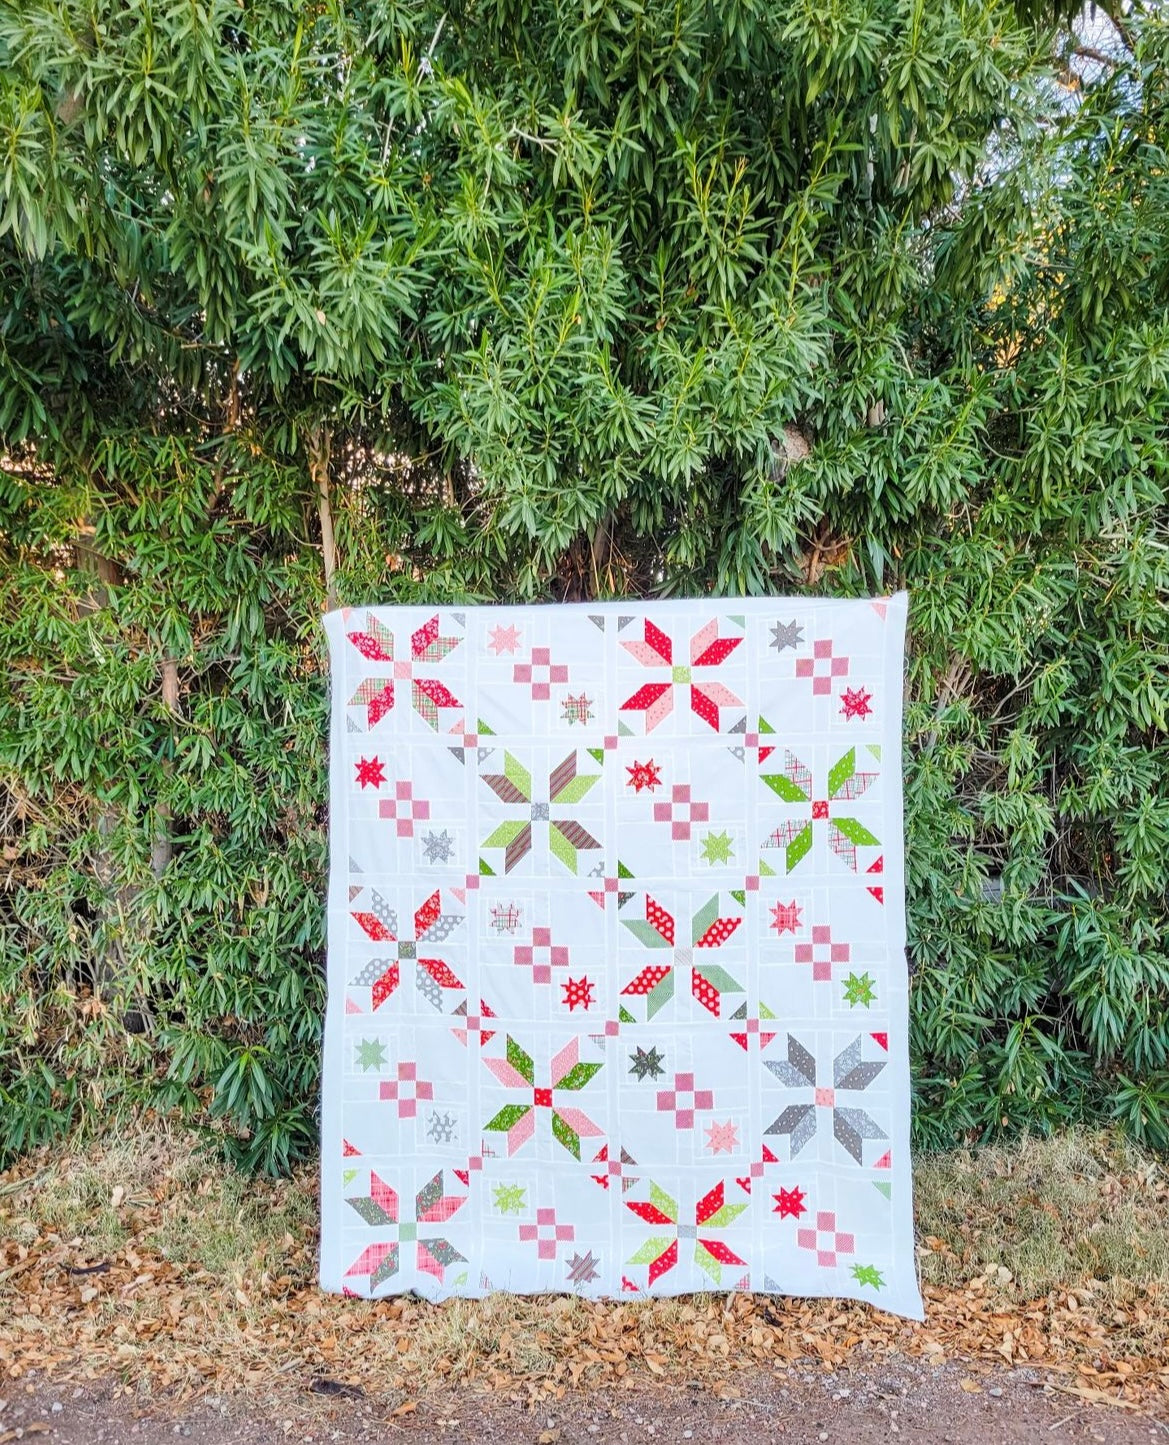 Favorite Things Quilt Kit - Pattern by Chelsi Stratton and Sherri McConnell for Moda Fabrics